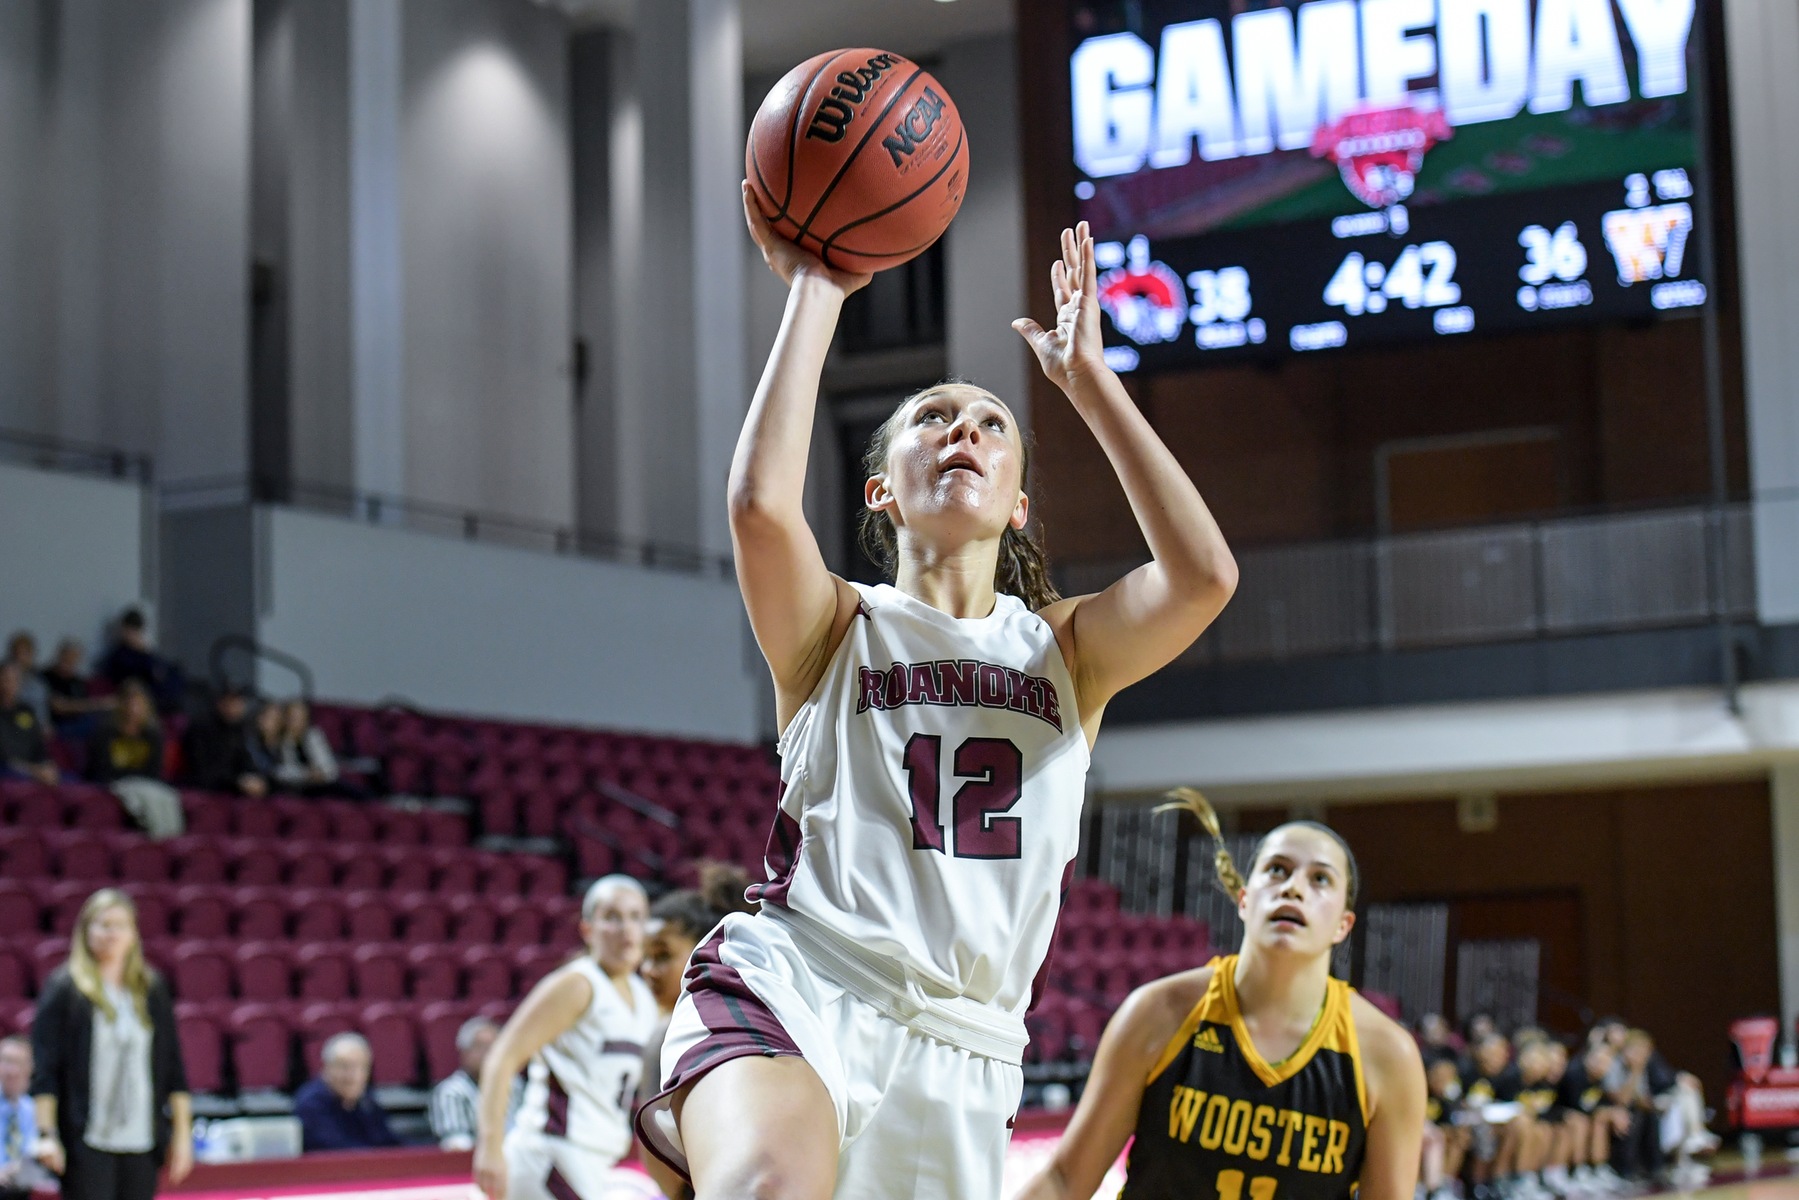 Kristina Harrel led three Maroons in double-figures with 21 points as Roanoke topped Wooster 76-66 on the opening day of the Susan Dunagan Holiday Classic